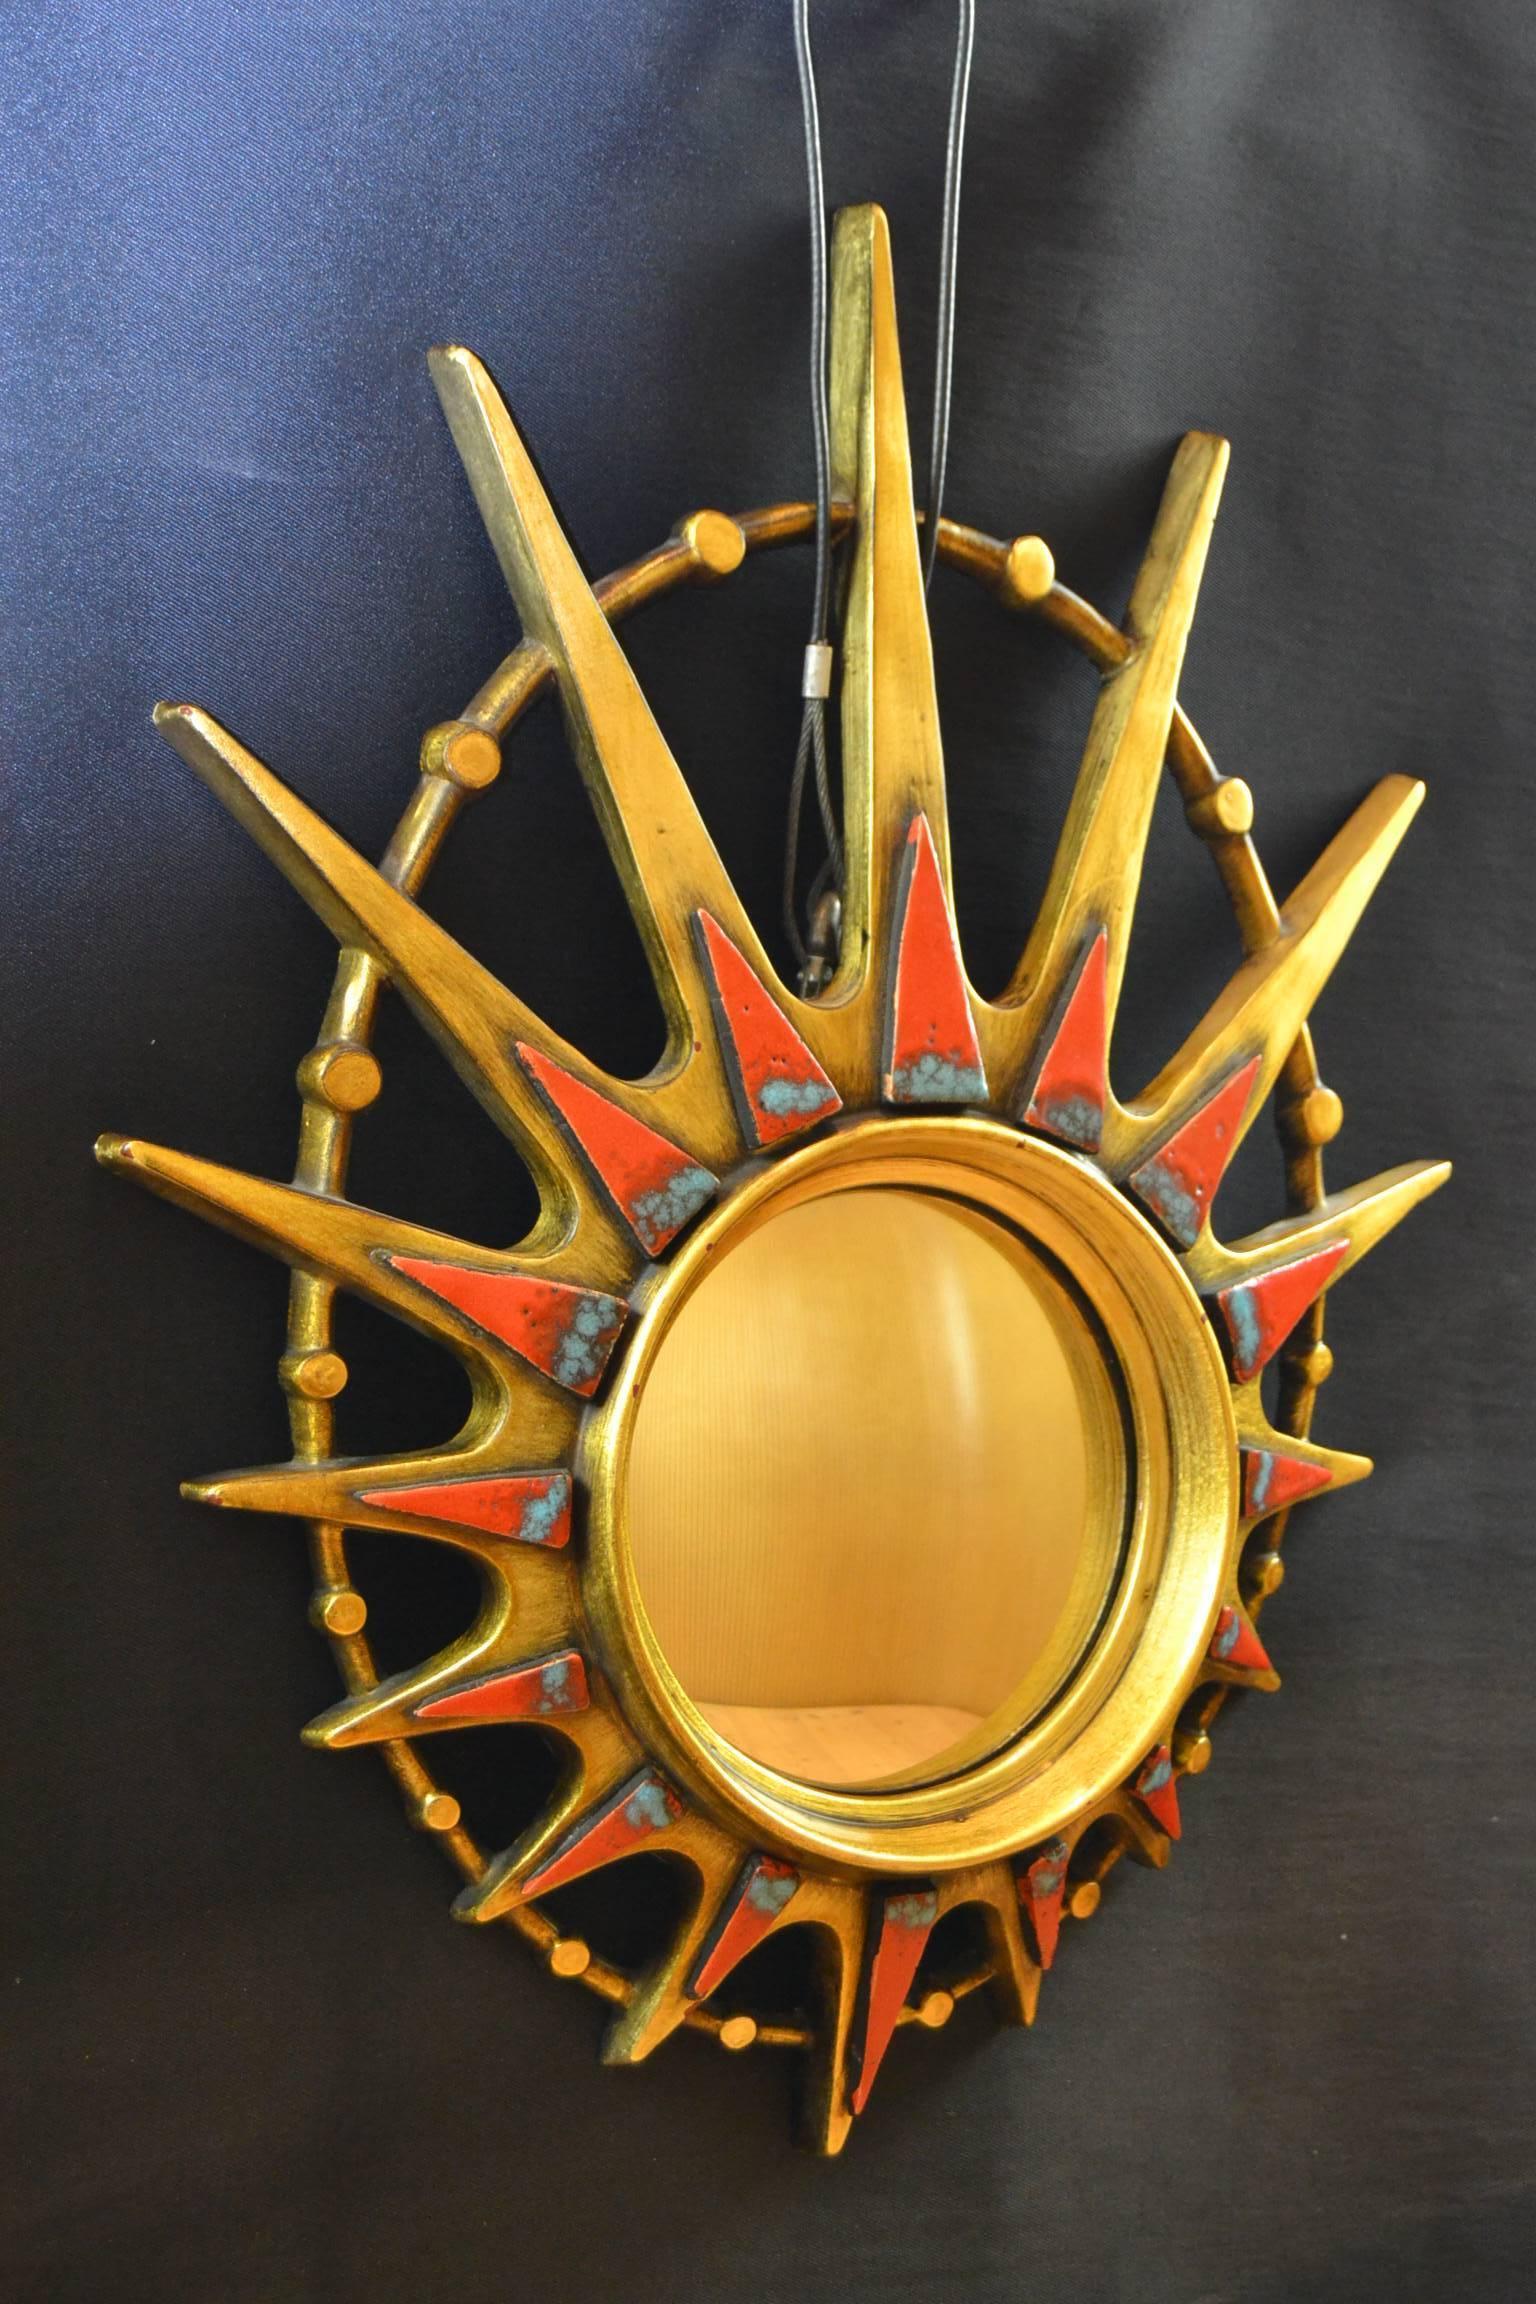 Hollywood Regency Mid-20th Century Oval Gilded Sunburst Mirror with Blue and Red Ceramic Details